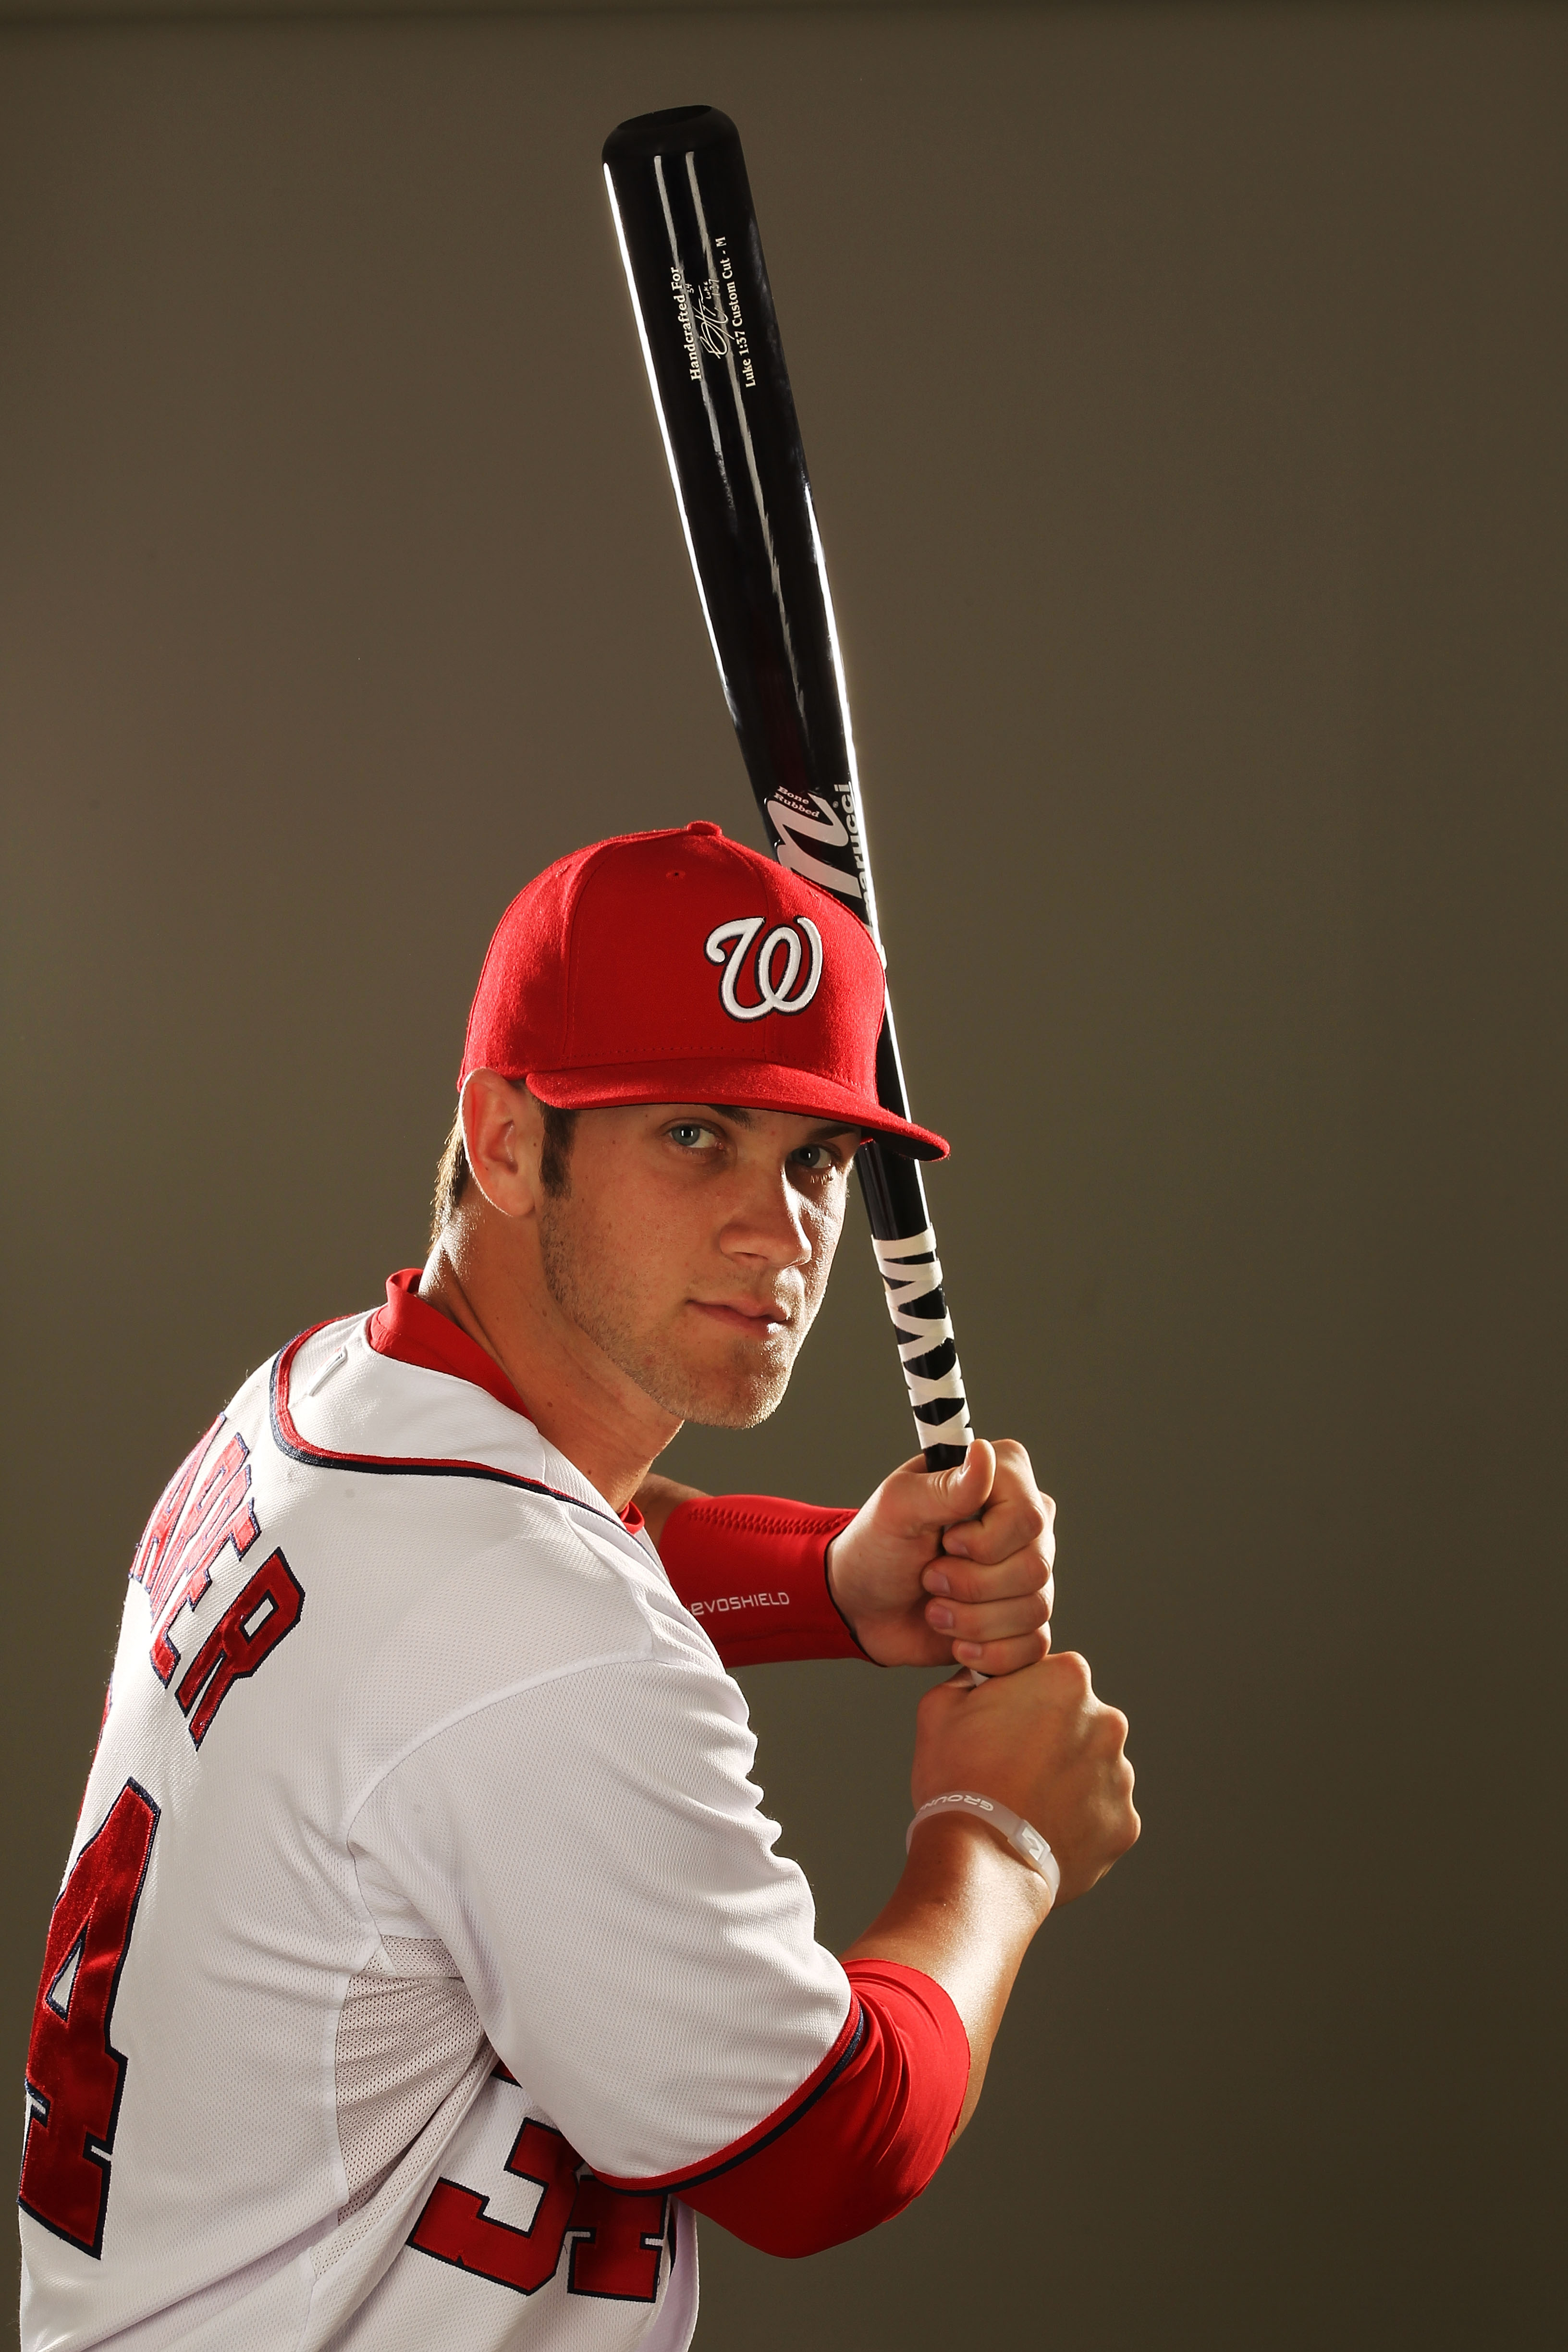 Bryce Harper makes his debut in the Florida Instructional League